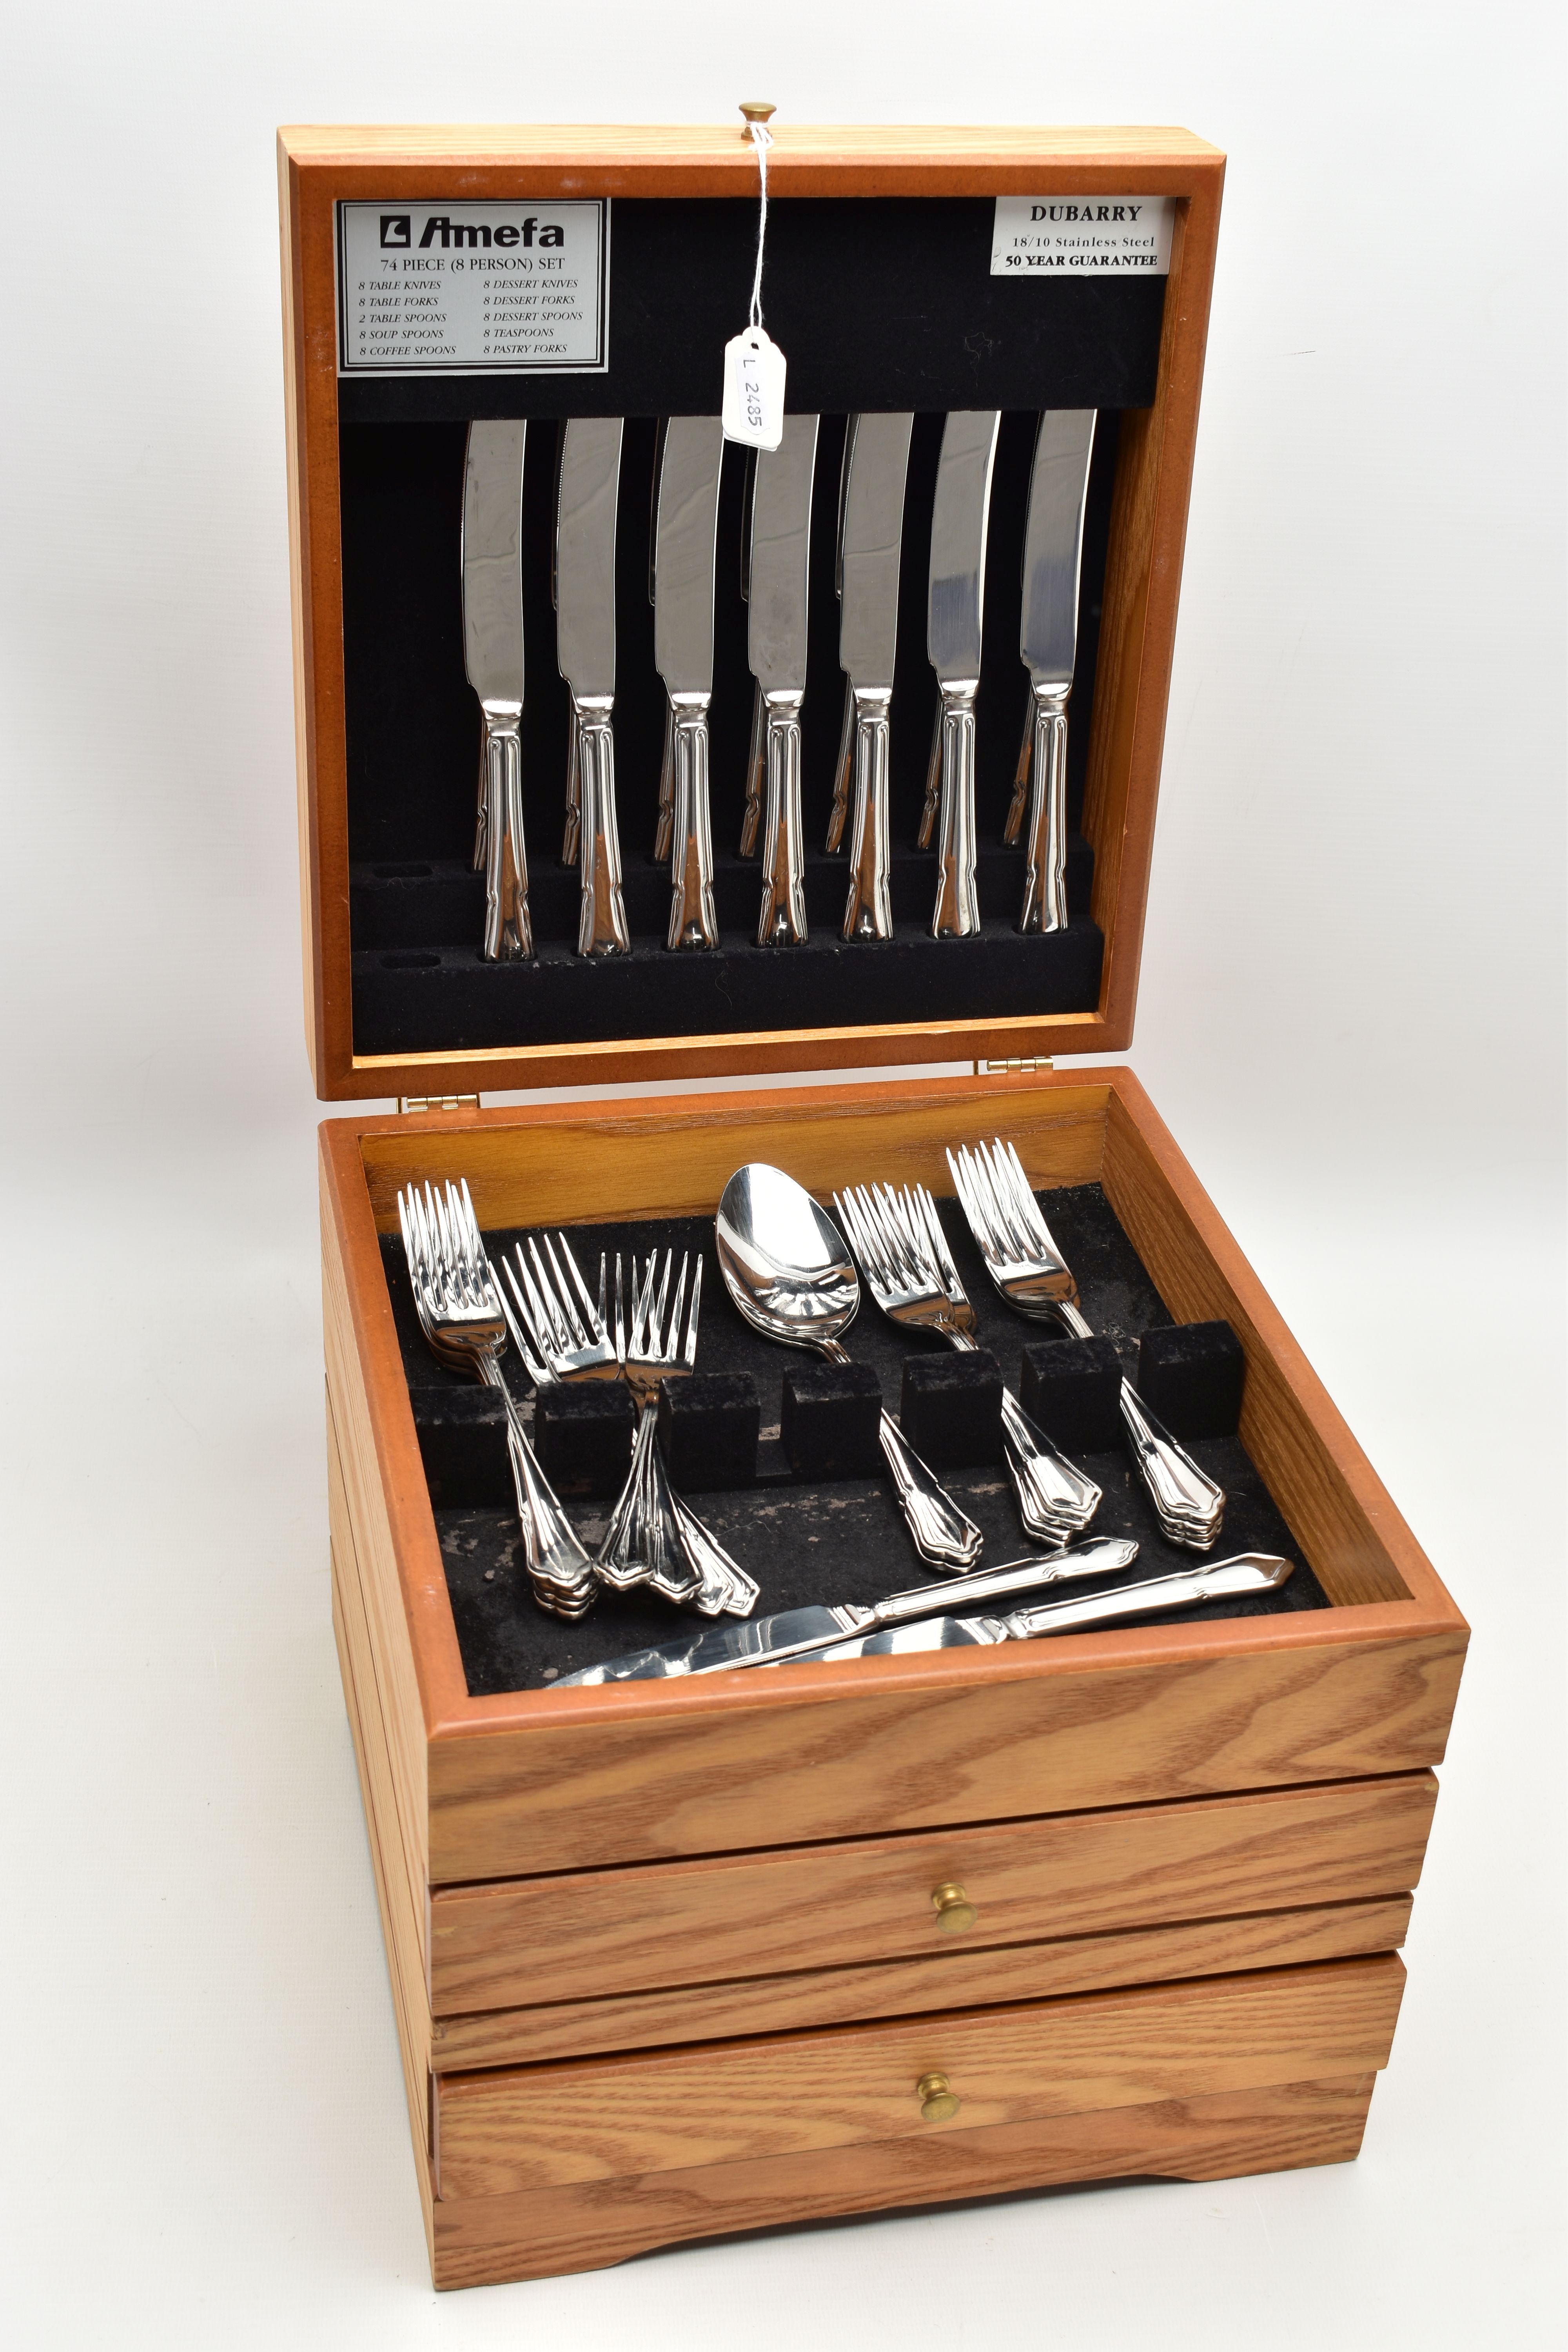 A 'AMEFA' CANTEEN, a complete seventy eight piece stainless steel canteen set, containing eight